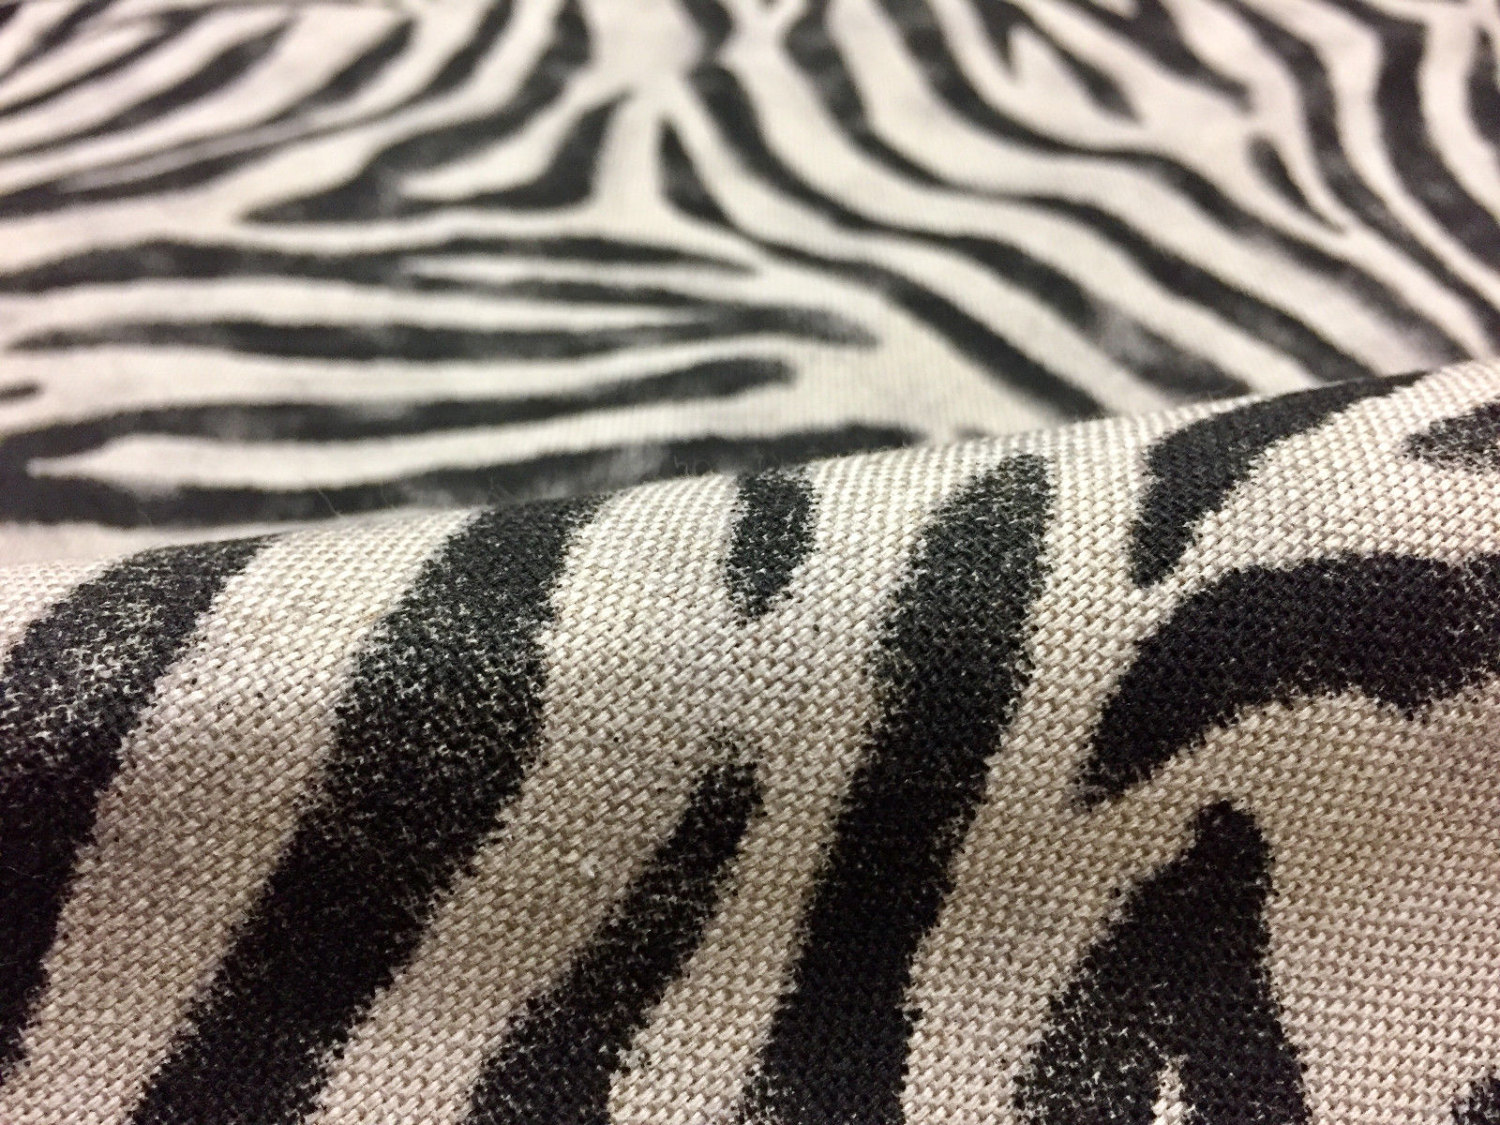 ZEBRA Animal Print Fabric Linen Look Curtains Upholstery Dressmaking  Material - Black Stripes - 55 inches wide - Lush Fabric